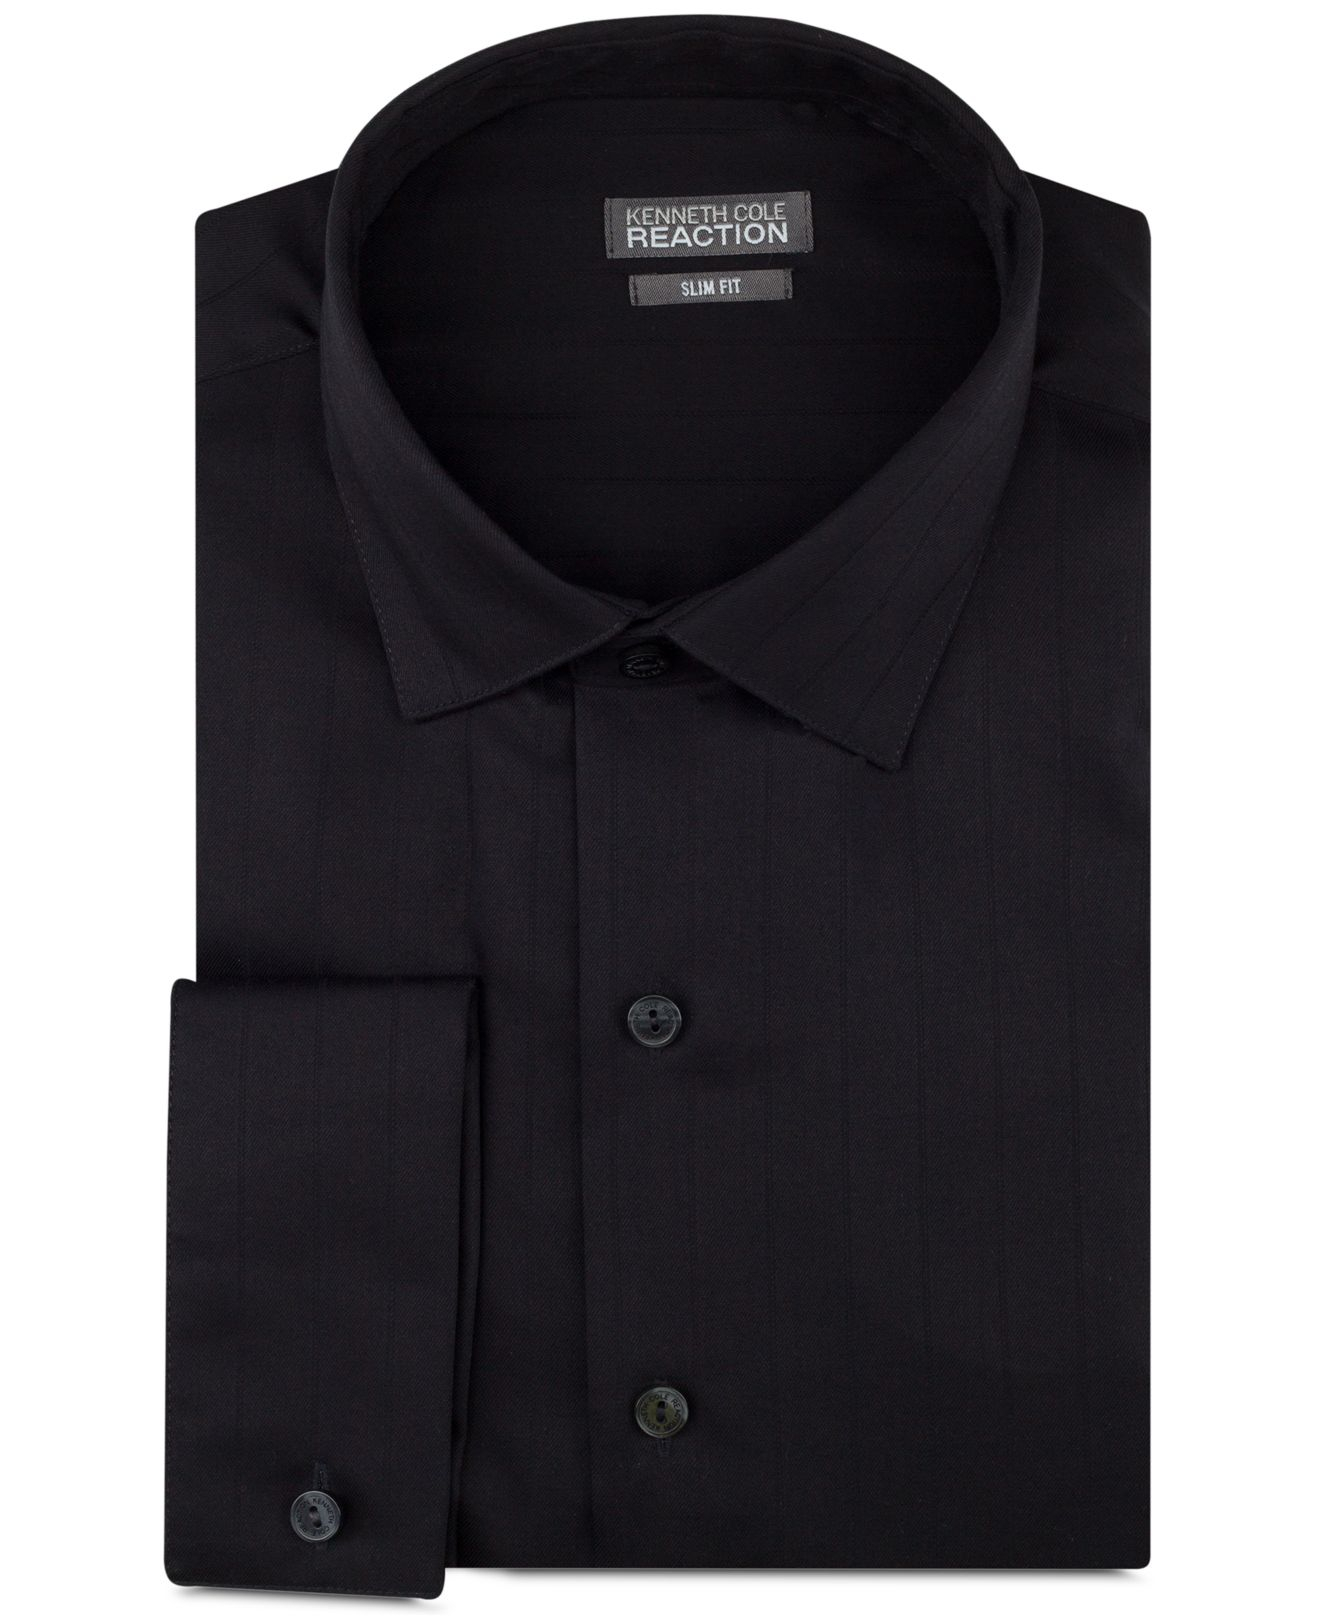 Lyst - Kenneth Cole Reaction Slim-Fit Textured Solid French Cuff Shirt ...